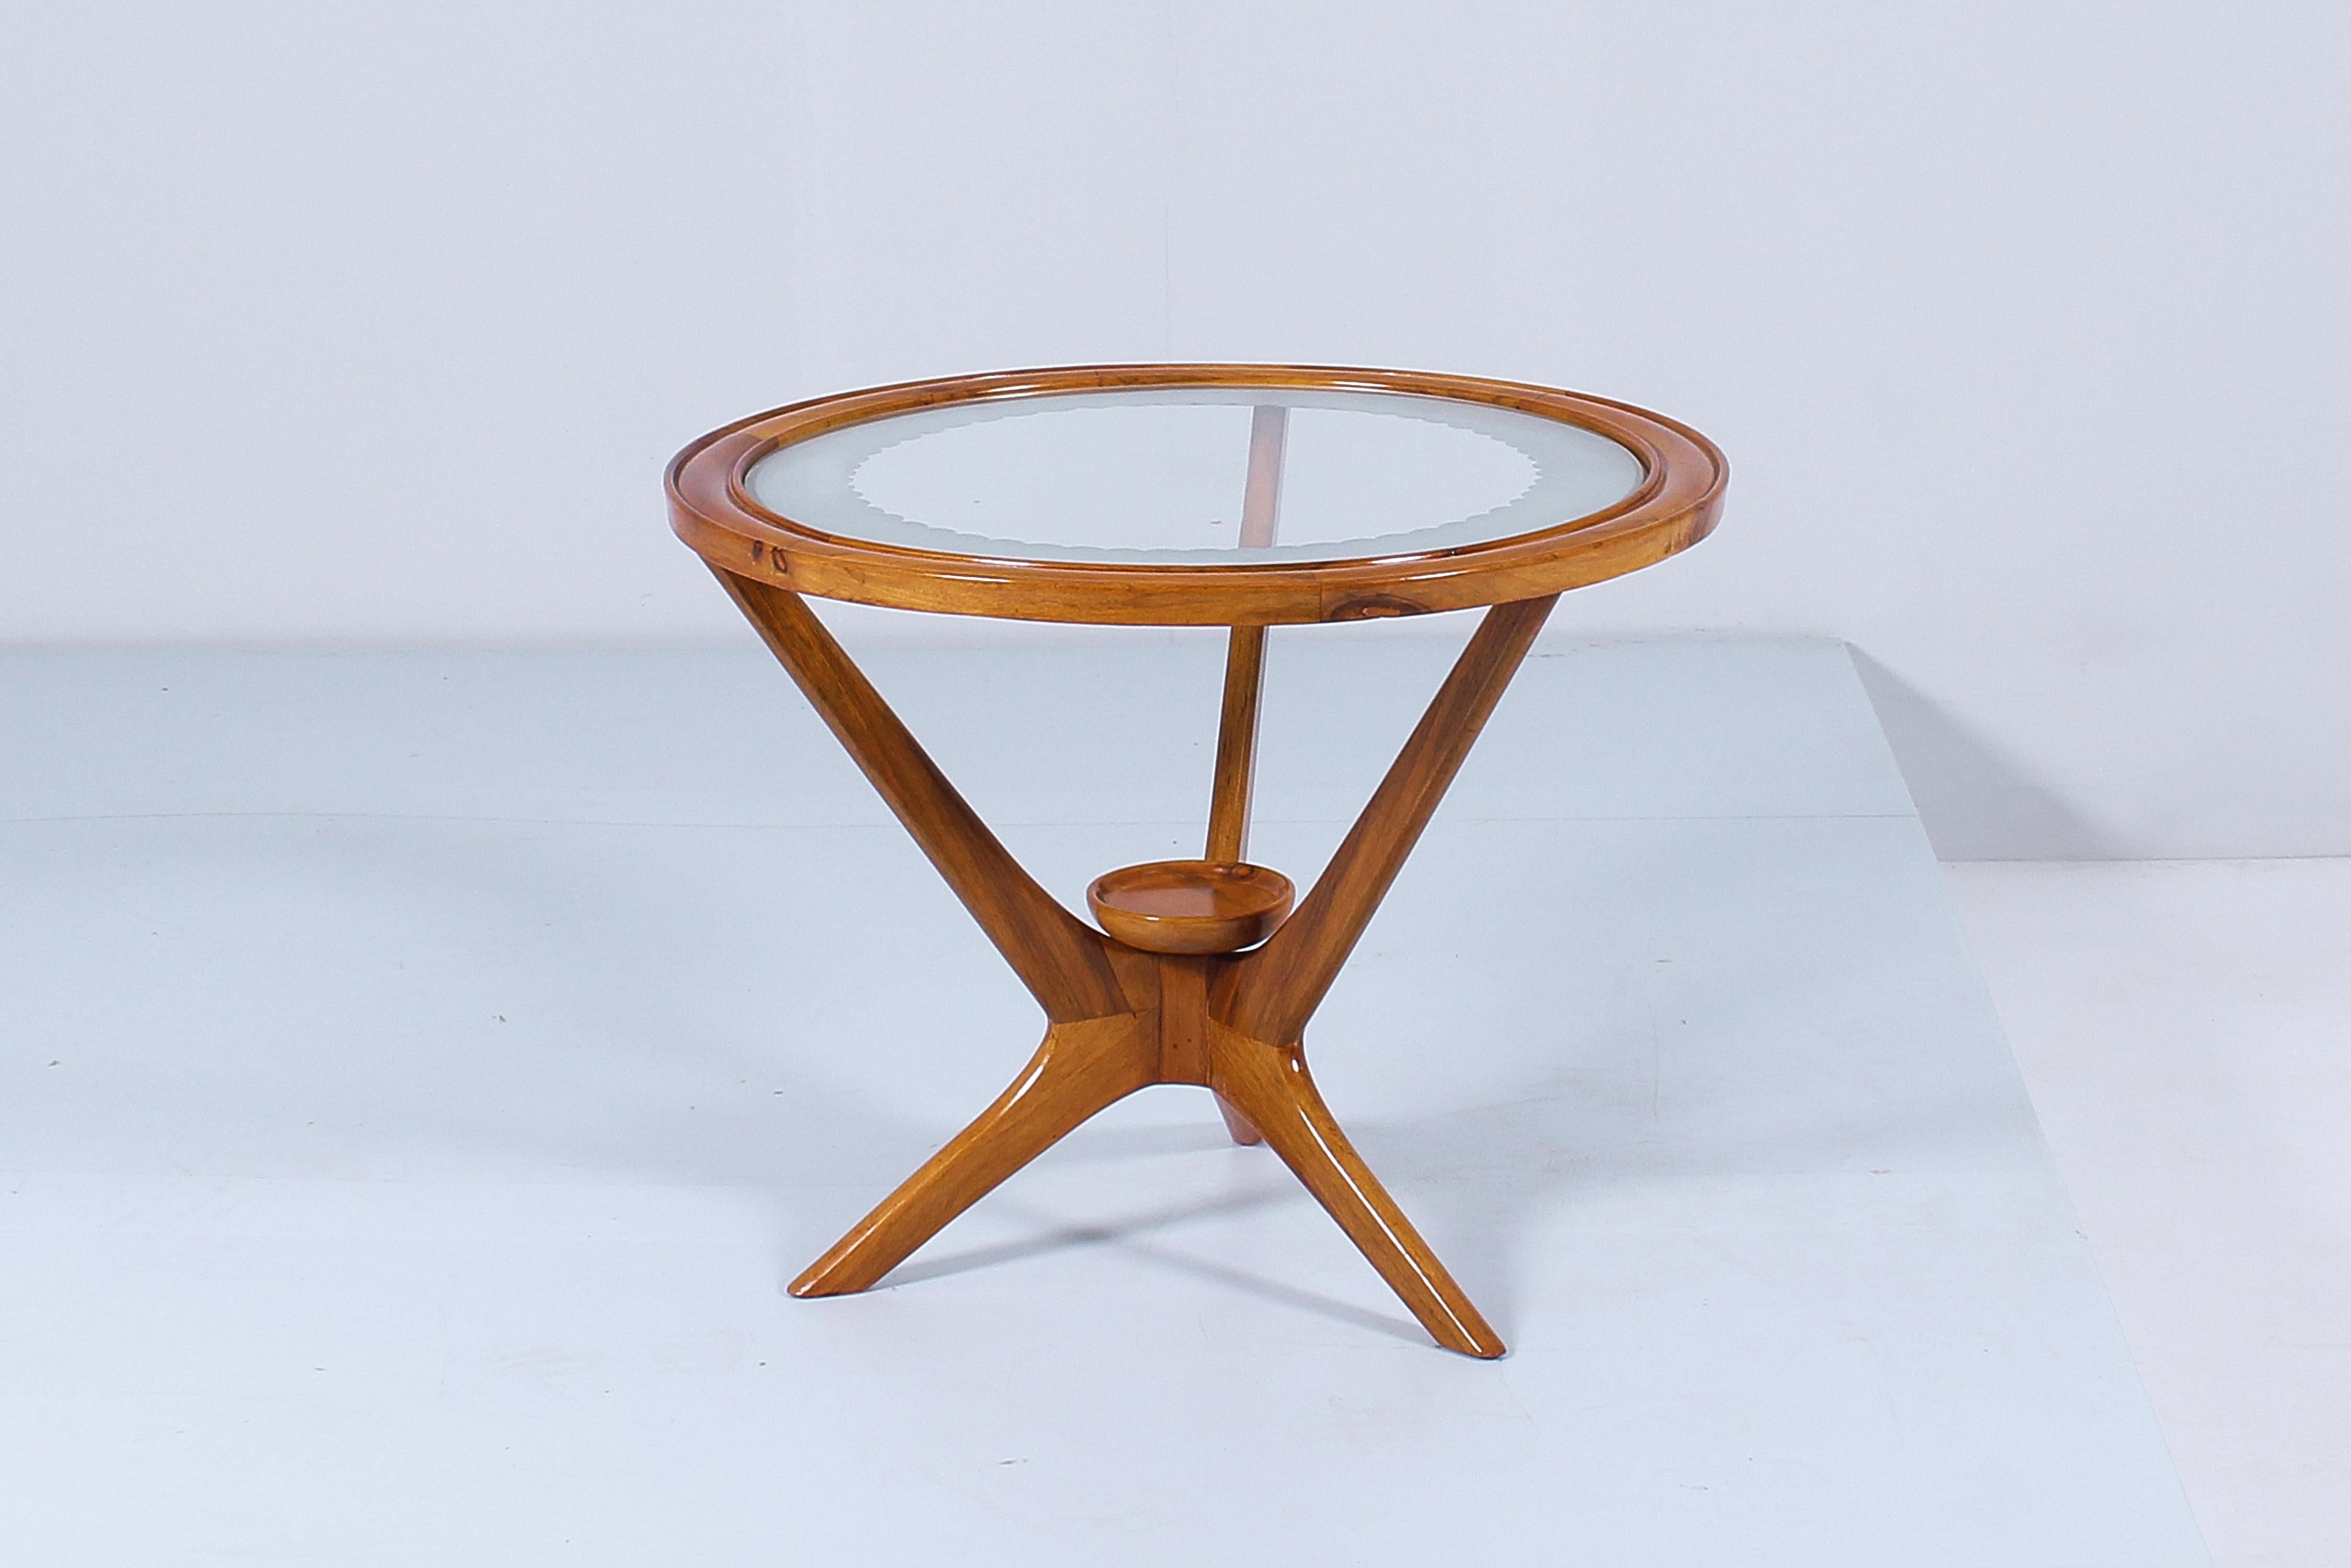 Delightful three-legged circular coffee table, with a transparent glass top with a satin motif around the perimeter. Structure entirely in light wood with central bowl under the top. Restored, in the style of Ico Parisi, Italian production from the